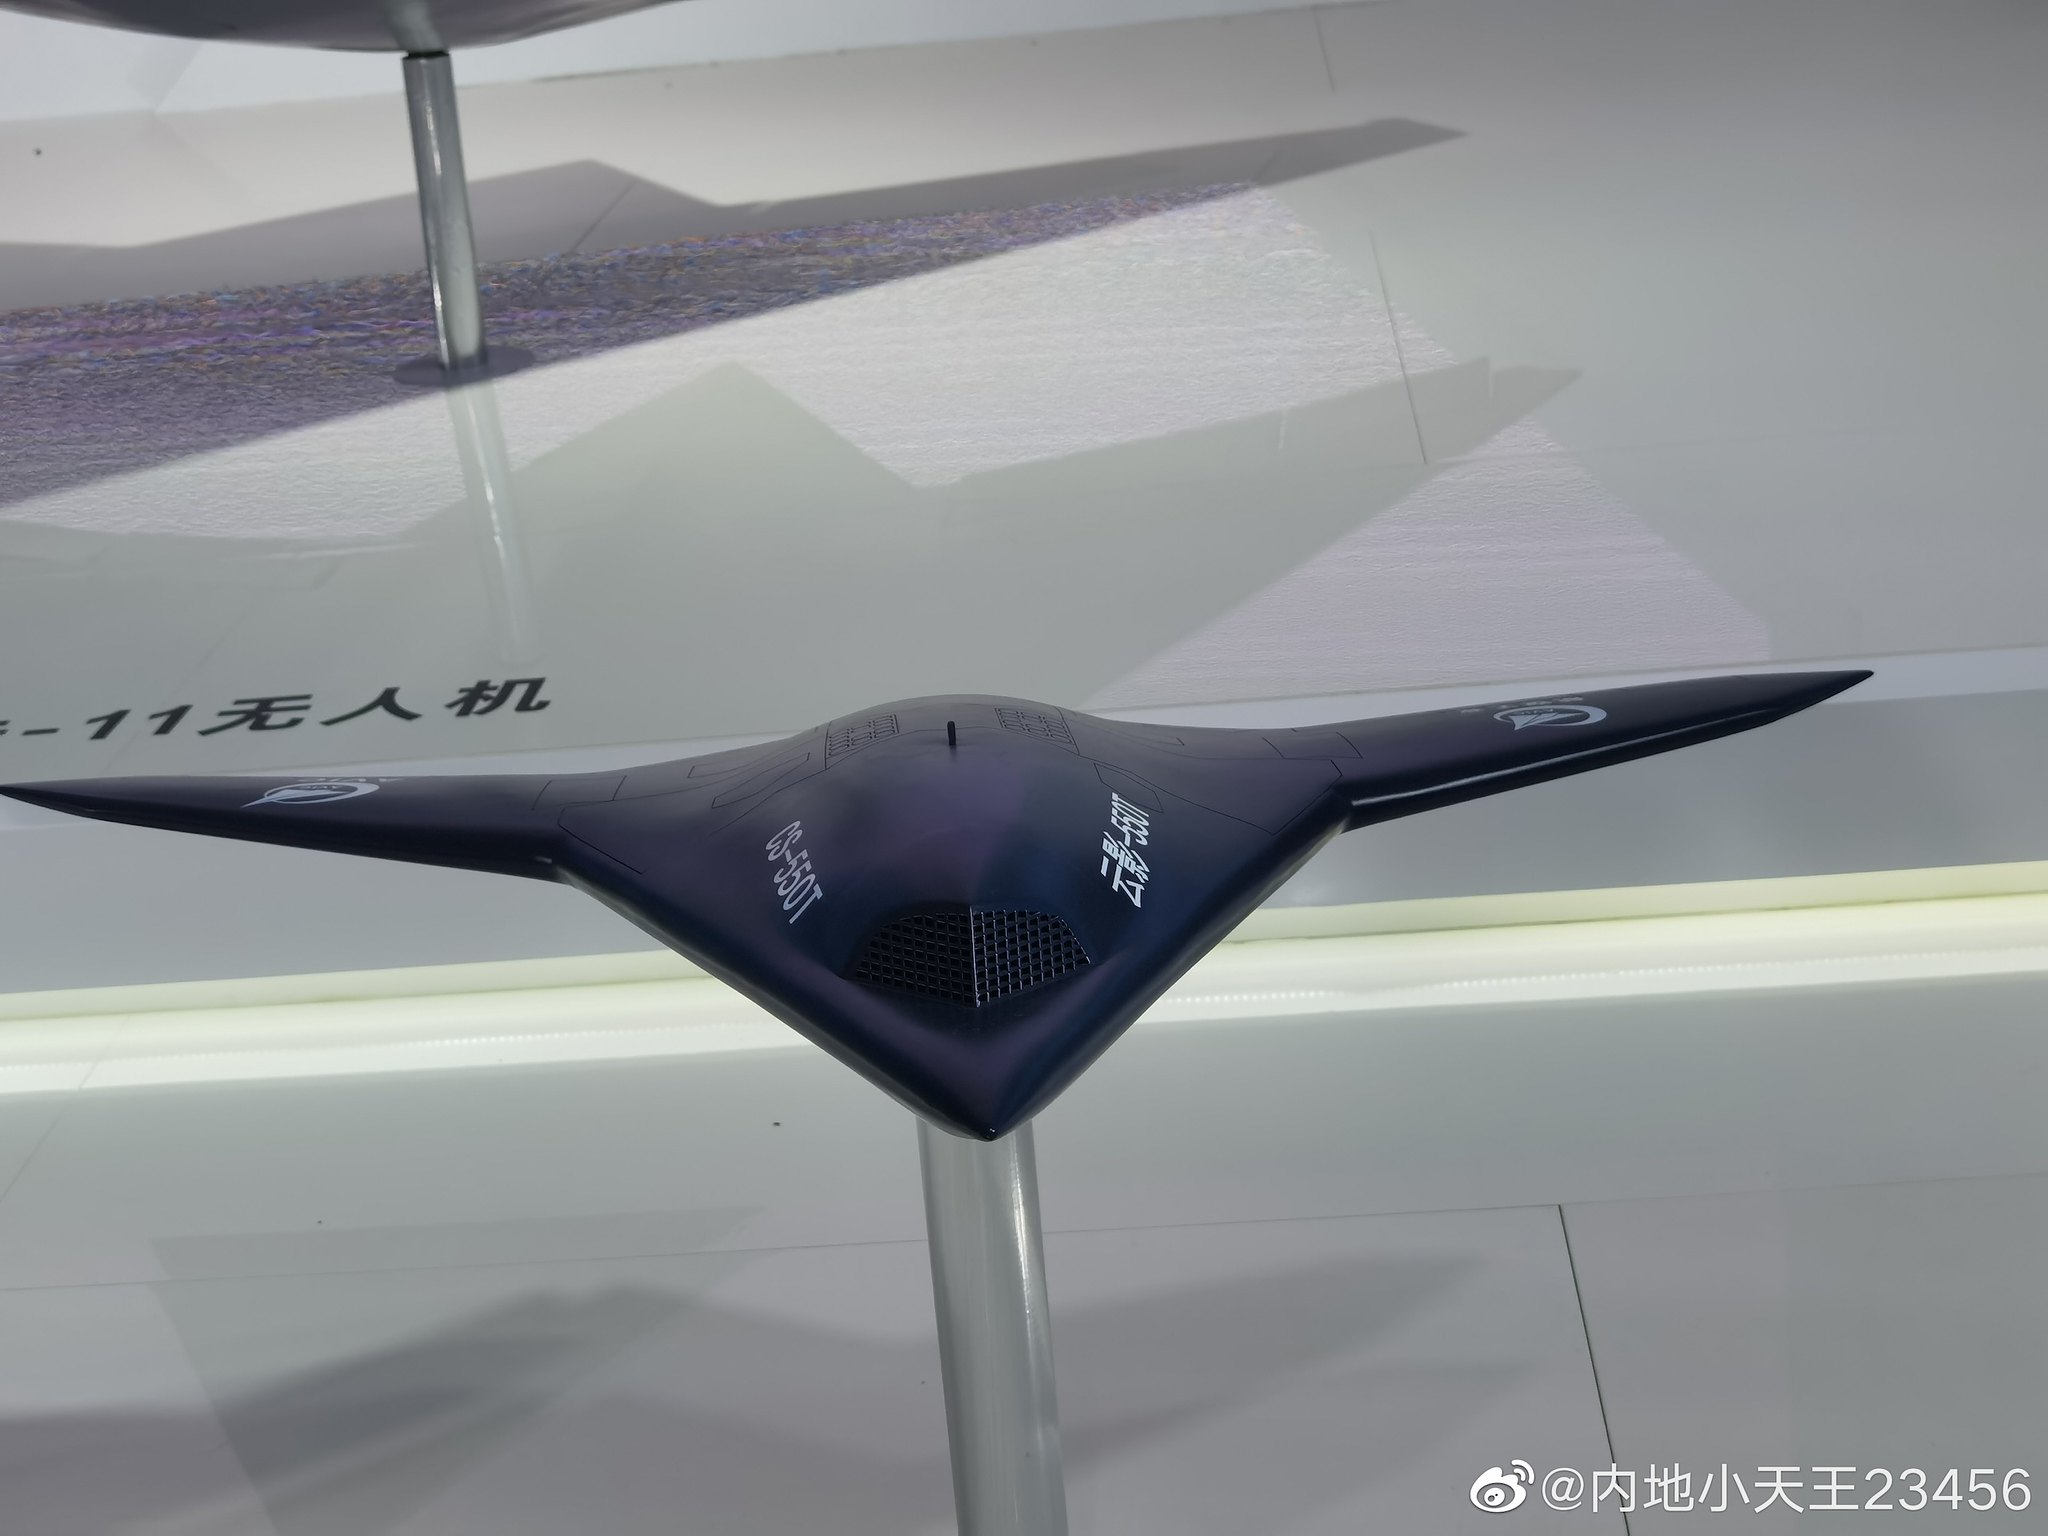 A mysterious stealth drone similar to the Northrop Grumman X-47B has been spotted in China - there are three versions of what it could be-7